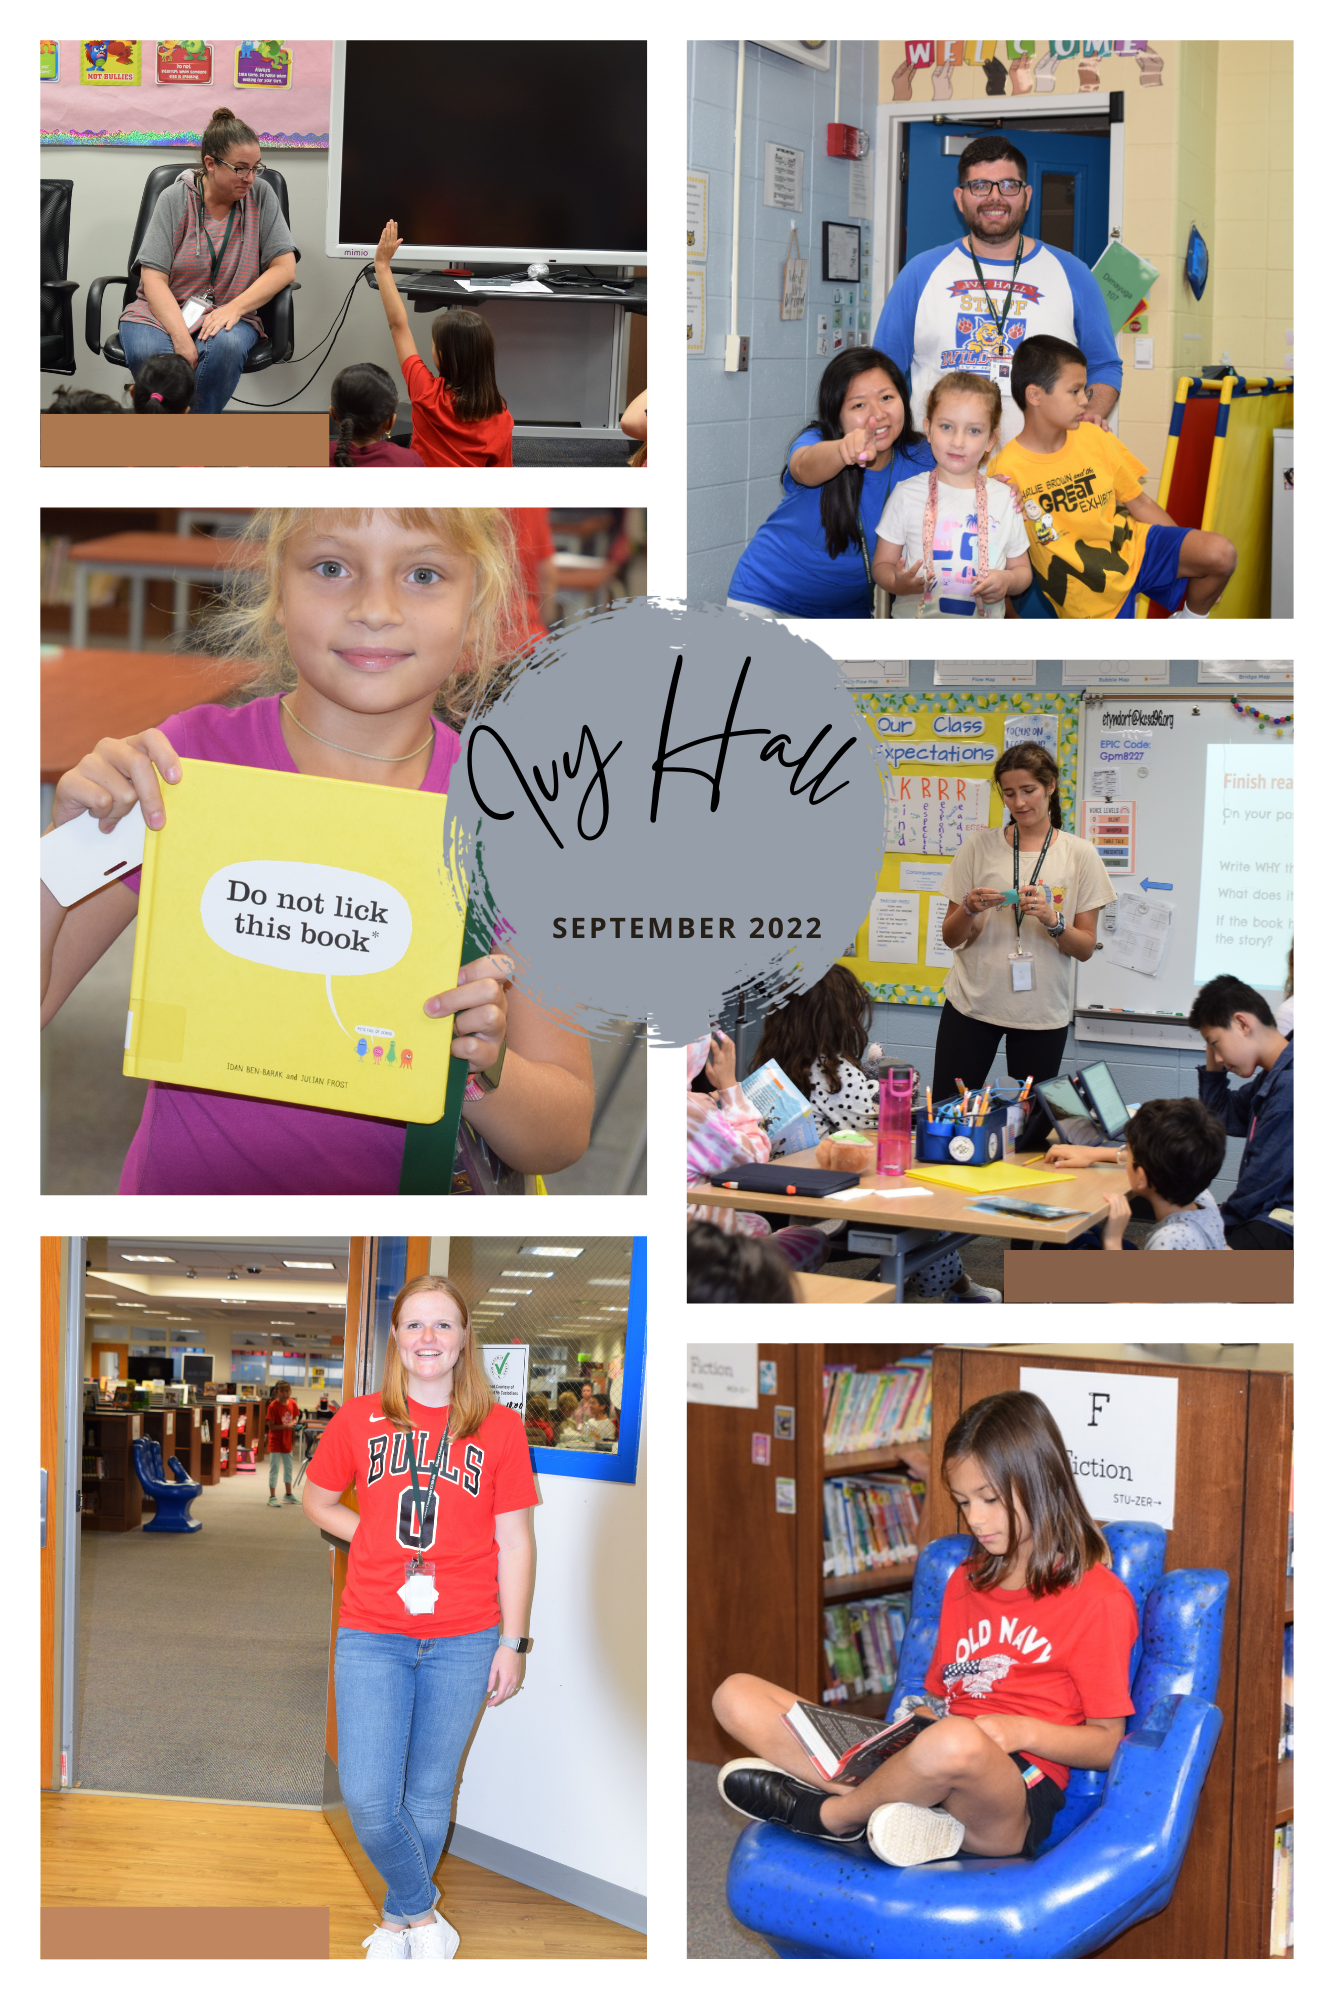 Ivy Hall Elementary School, September 2022 photo collage